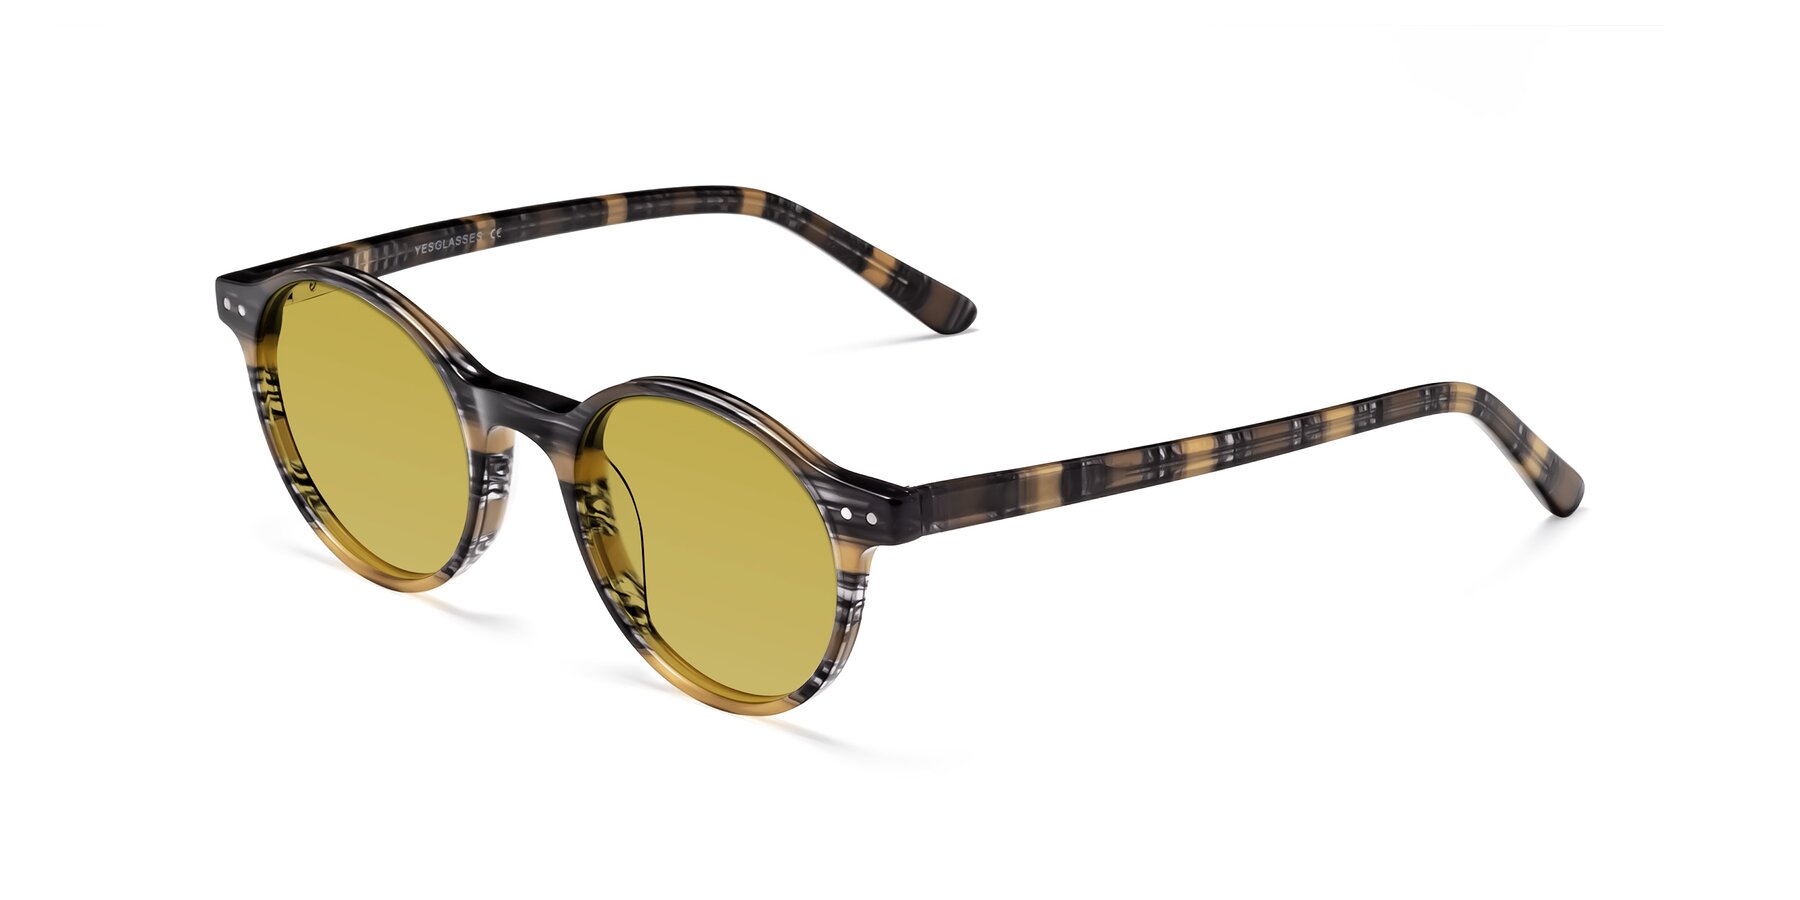 Angle of Jardi in Stripe Yellow Grey with Champagne Tinted Lenses